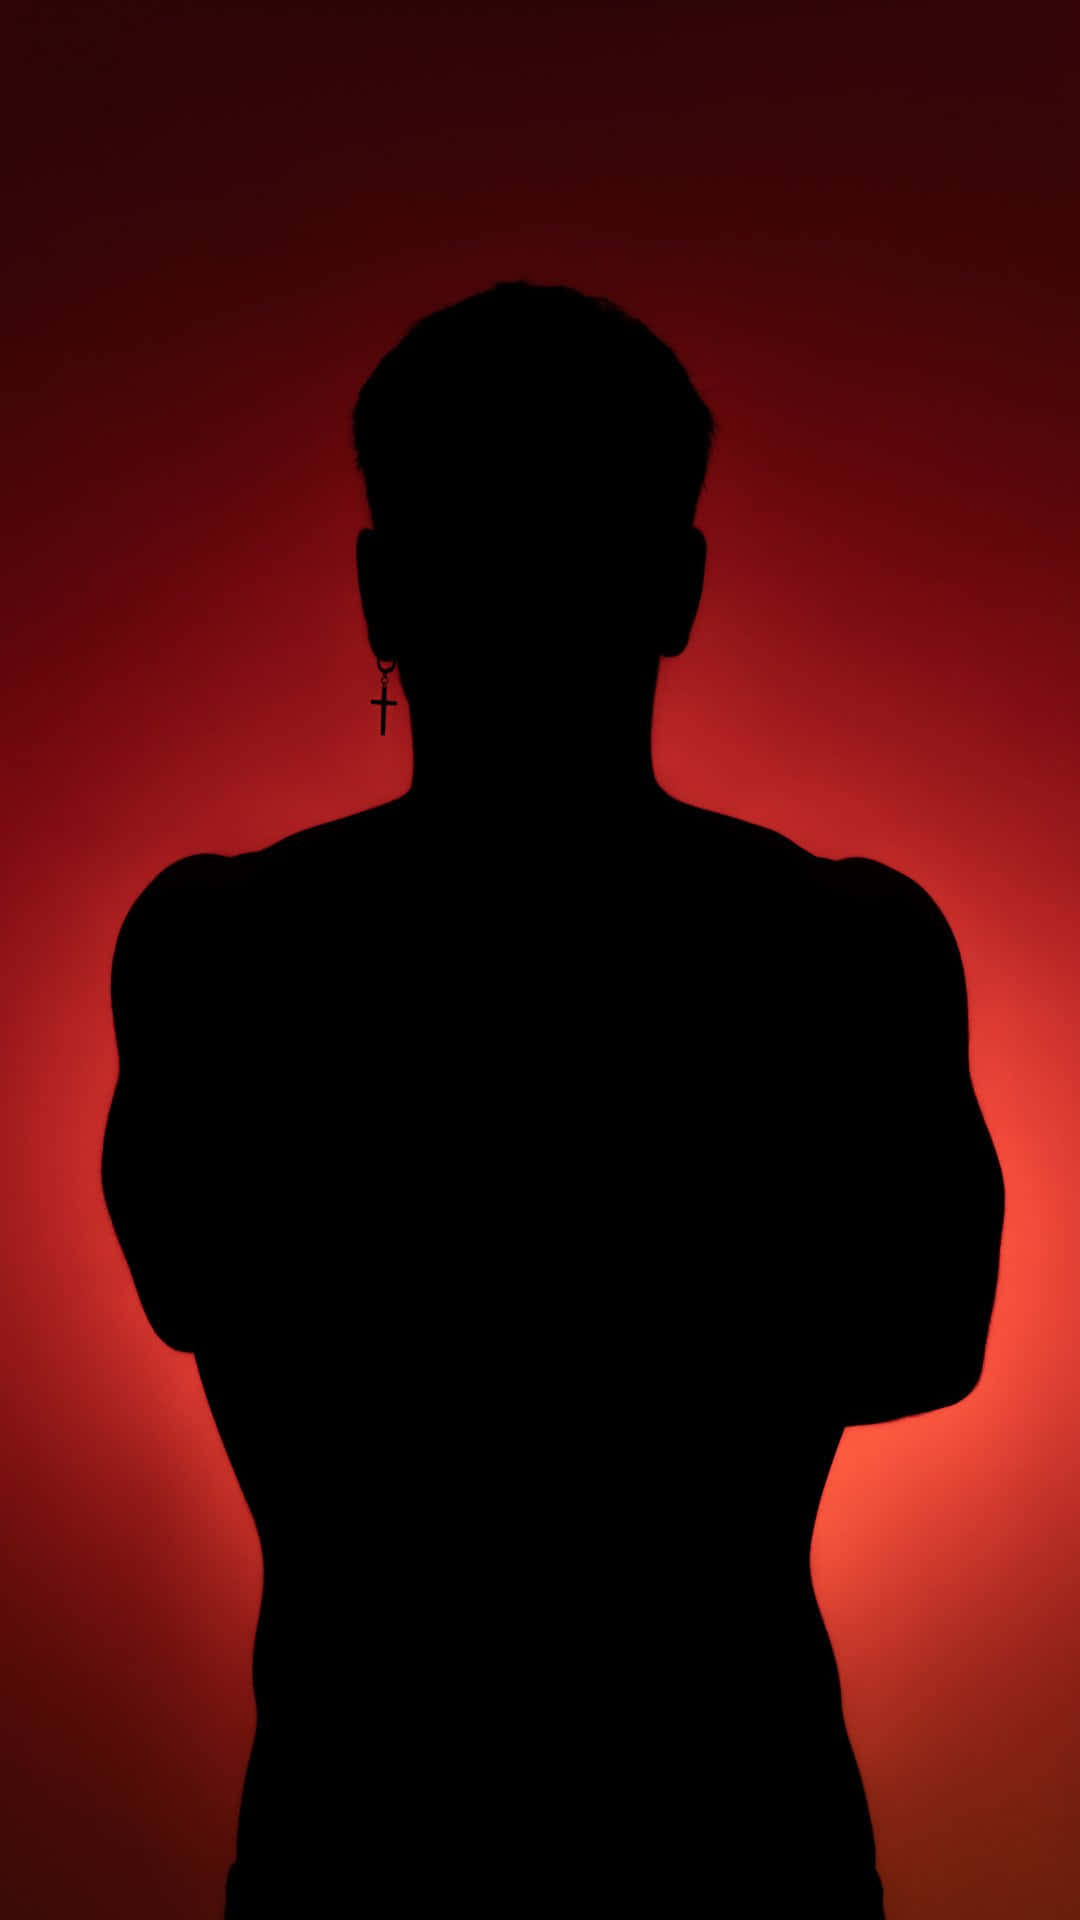 Mysterious Man Silhouette Red Background Wallpaper